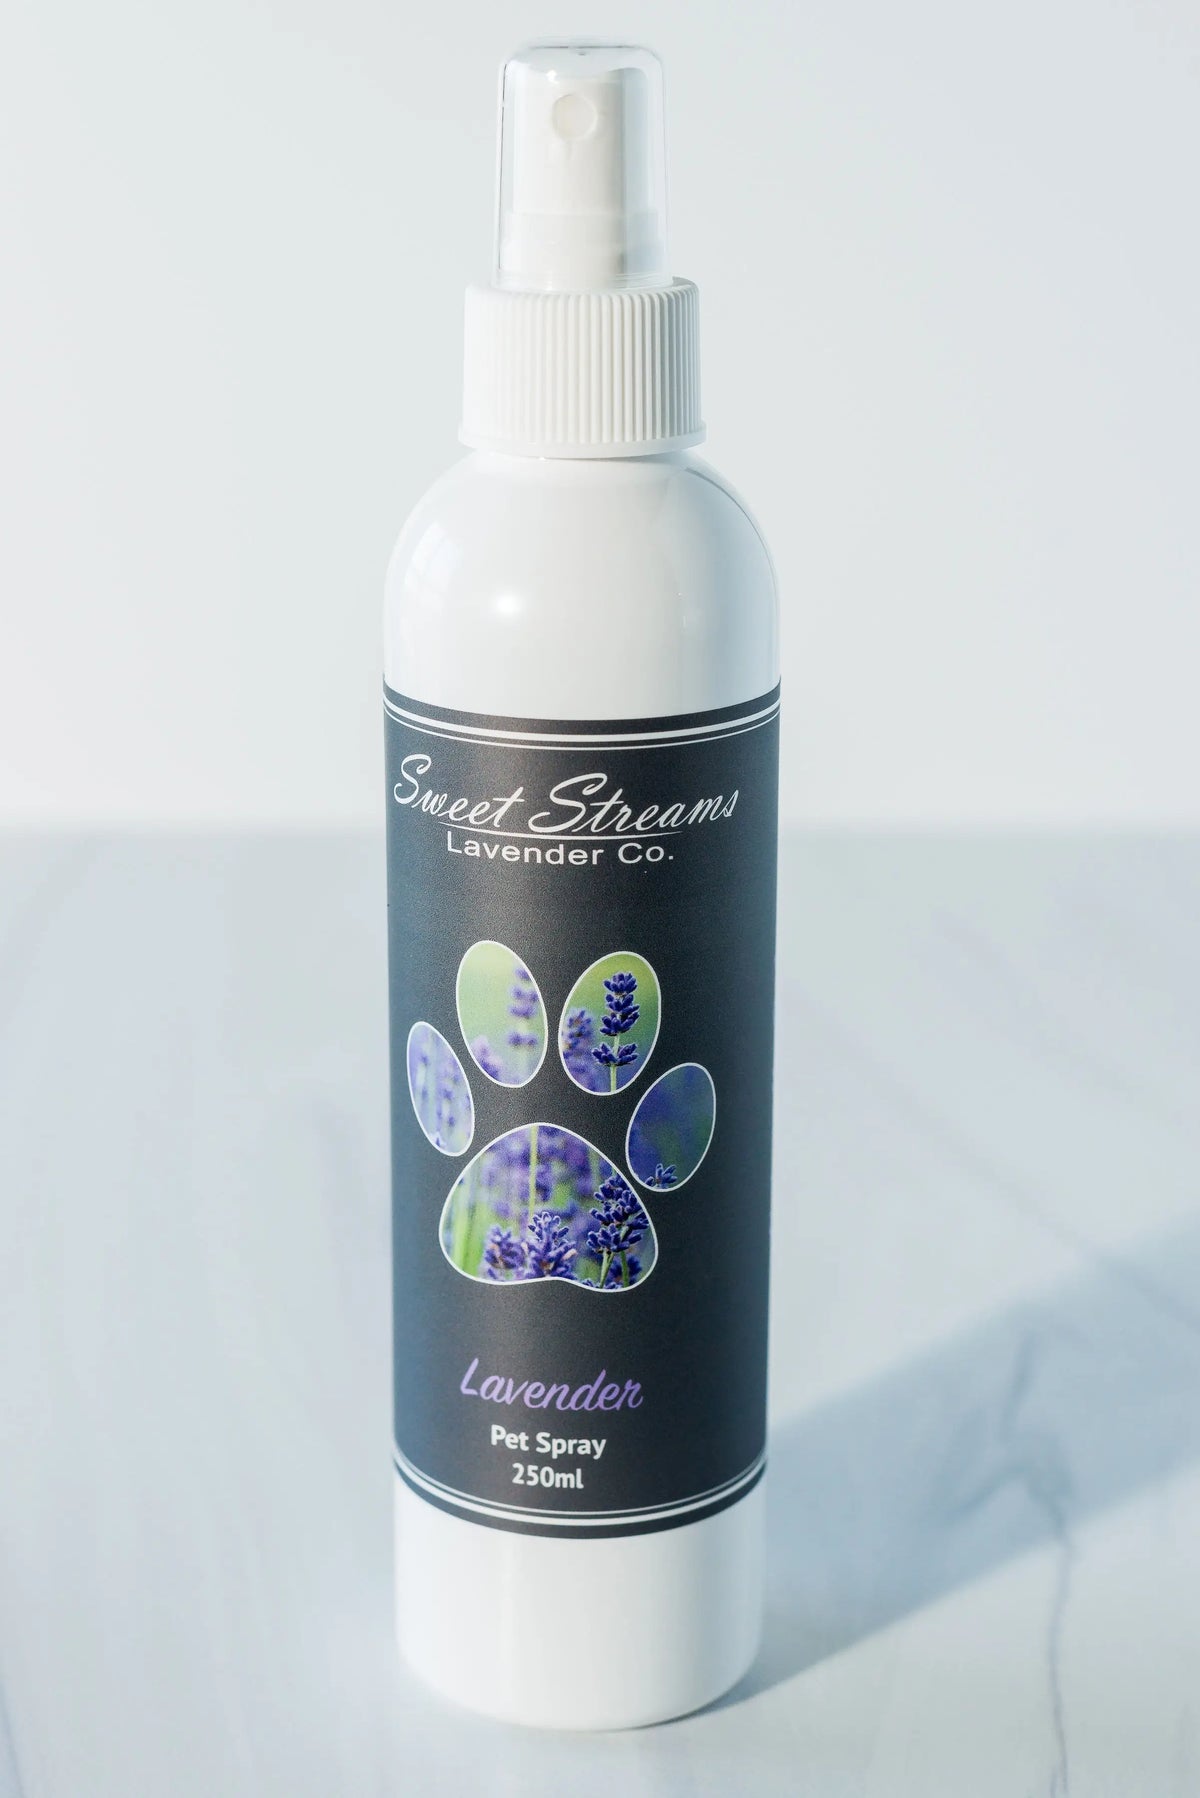 A white spray bottle labeled "Sweet Streams Lavender Co. Lavender Pet Spray" with images of lavender flowers on it, standing on a marble surface.